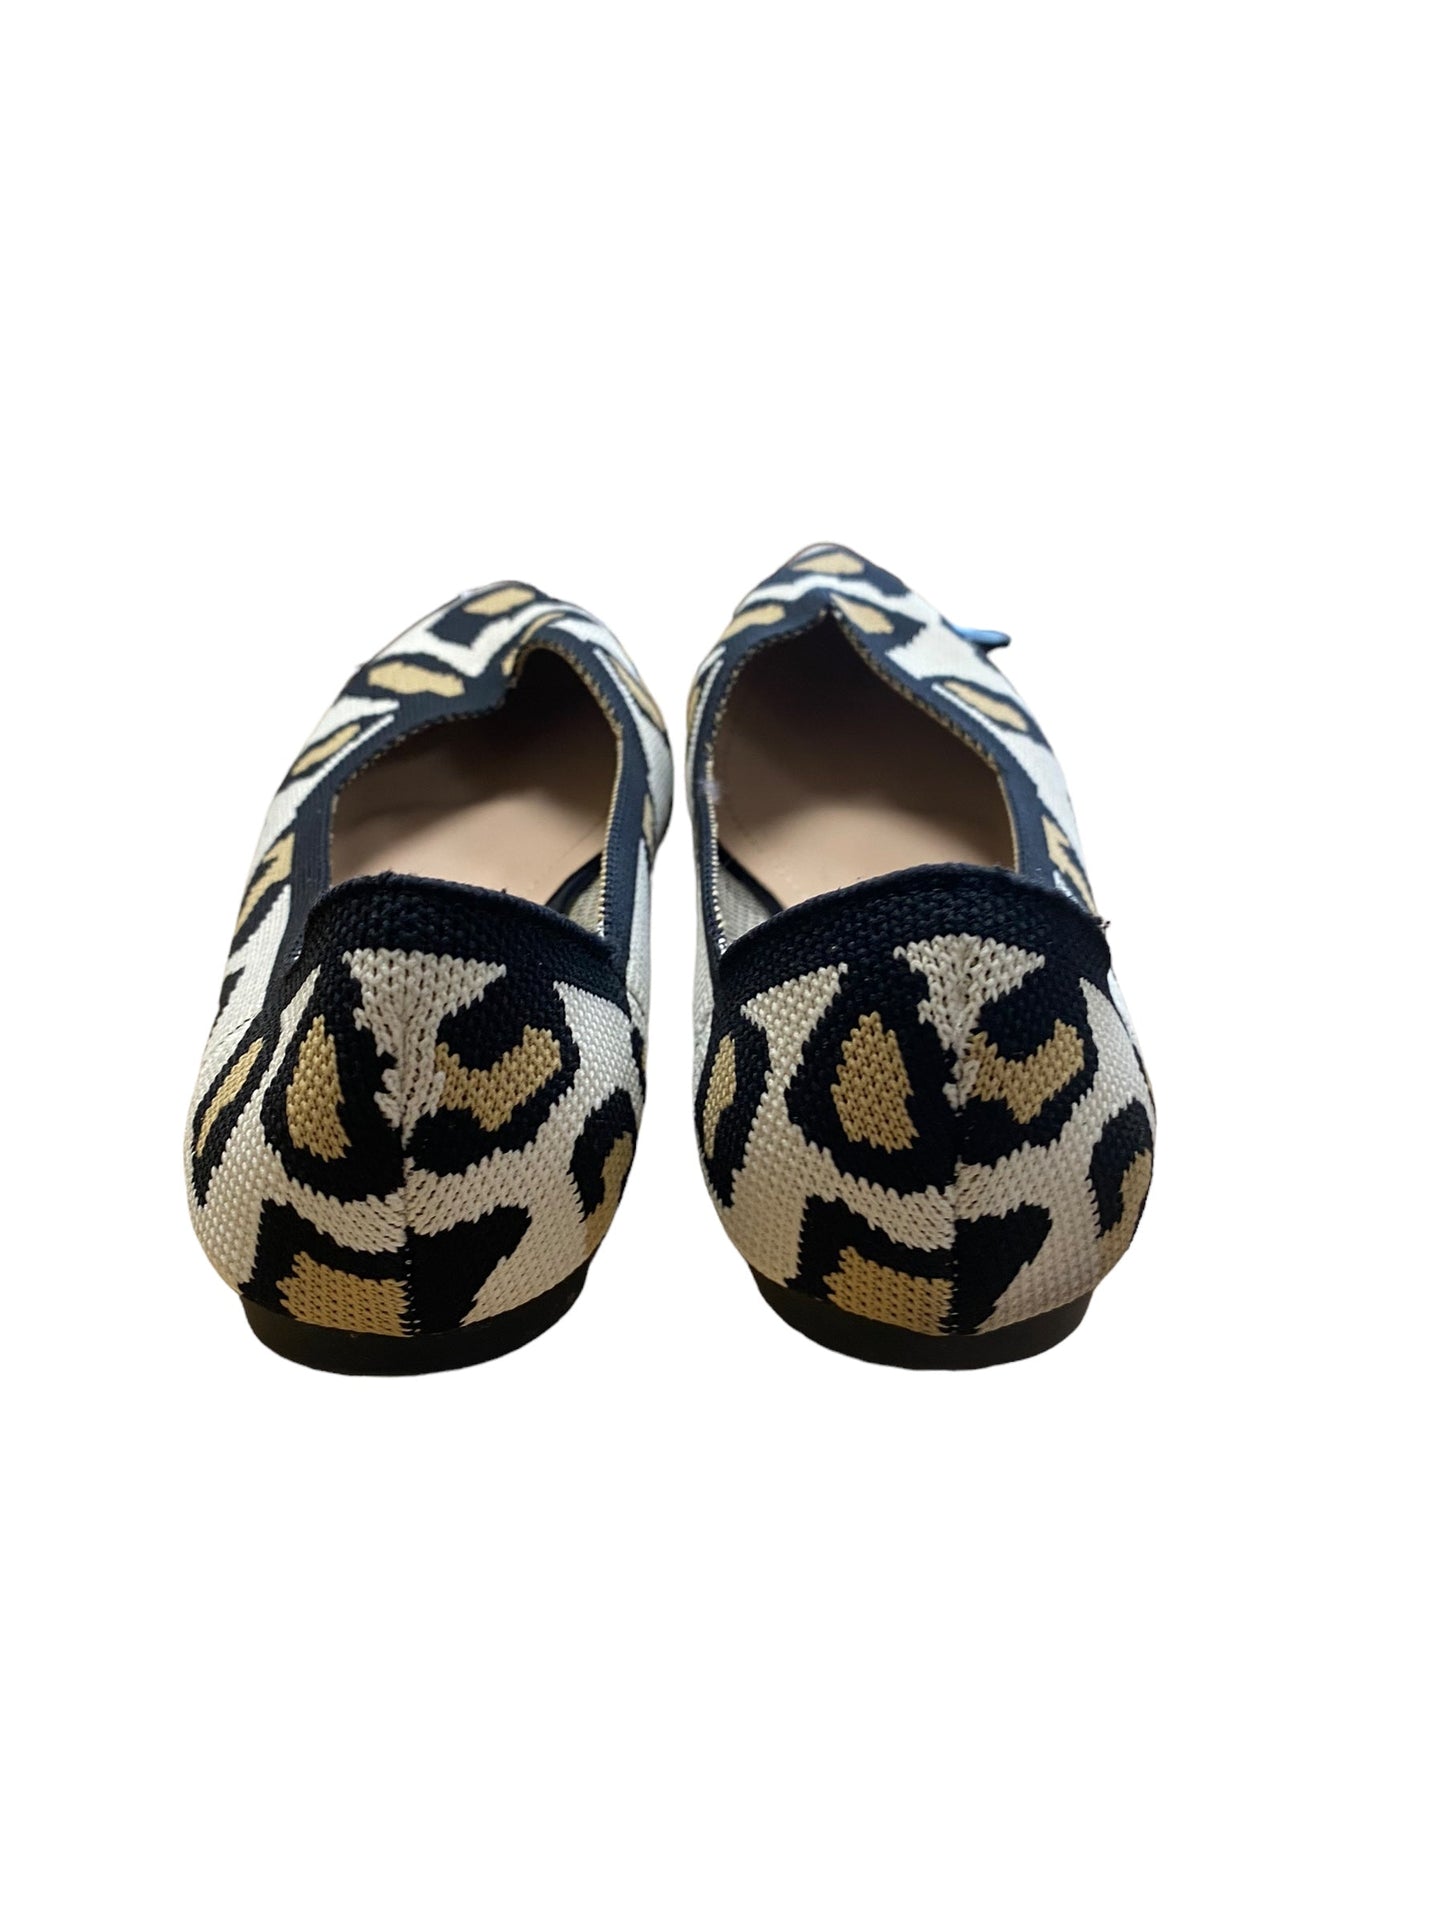 Animal Print Shoes Flats Clothes Mentor, Size 10